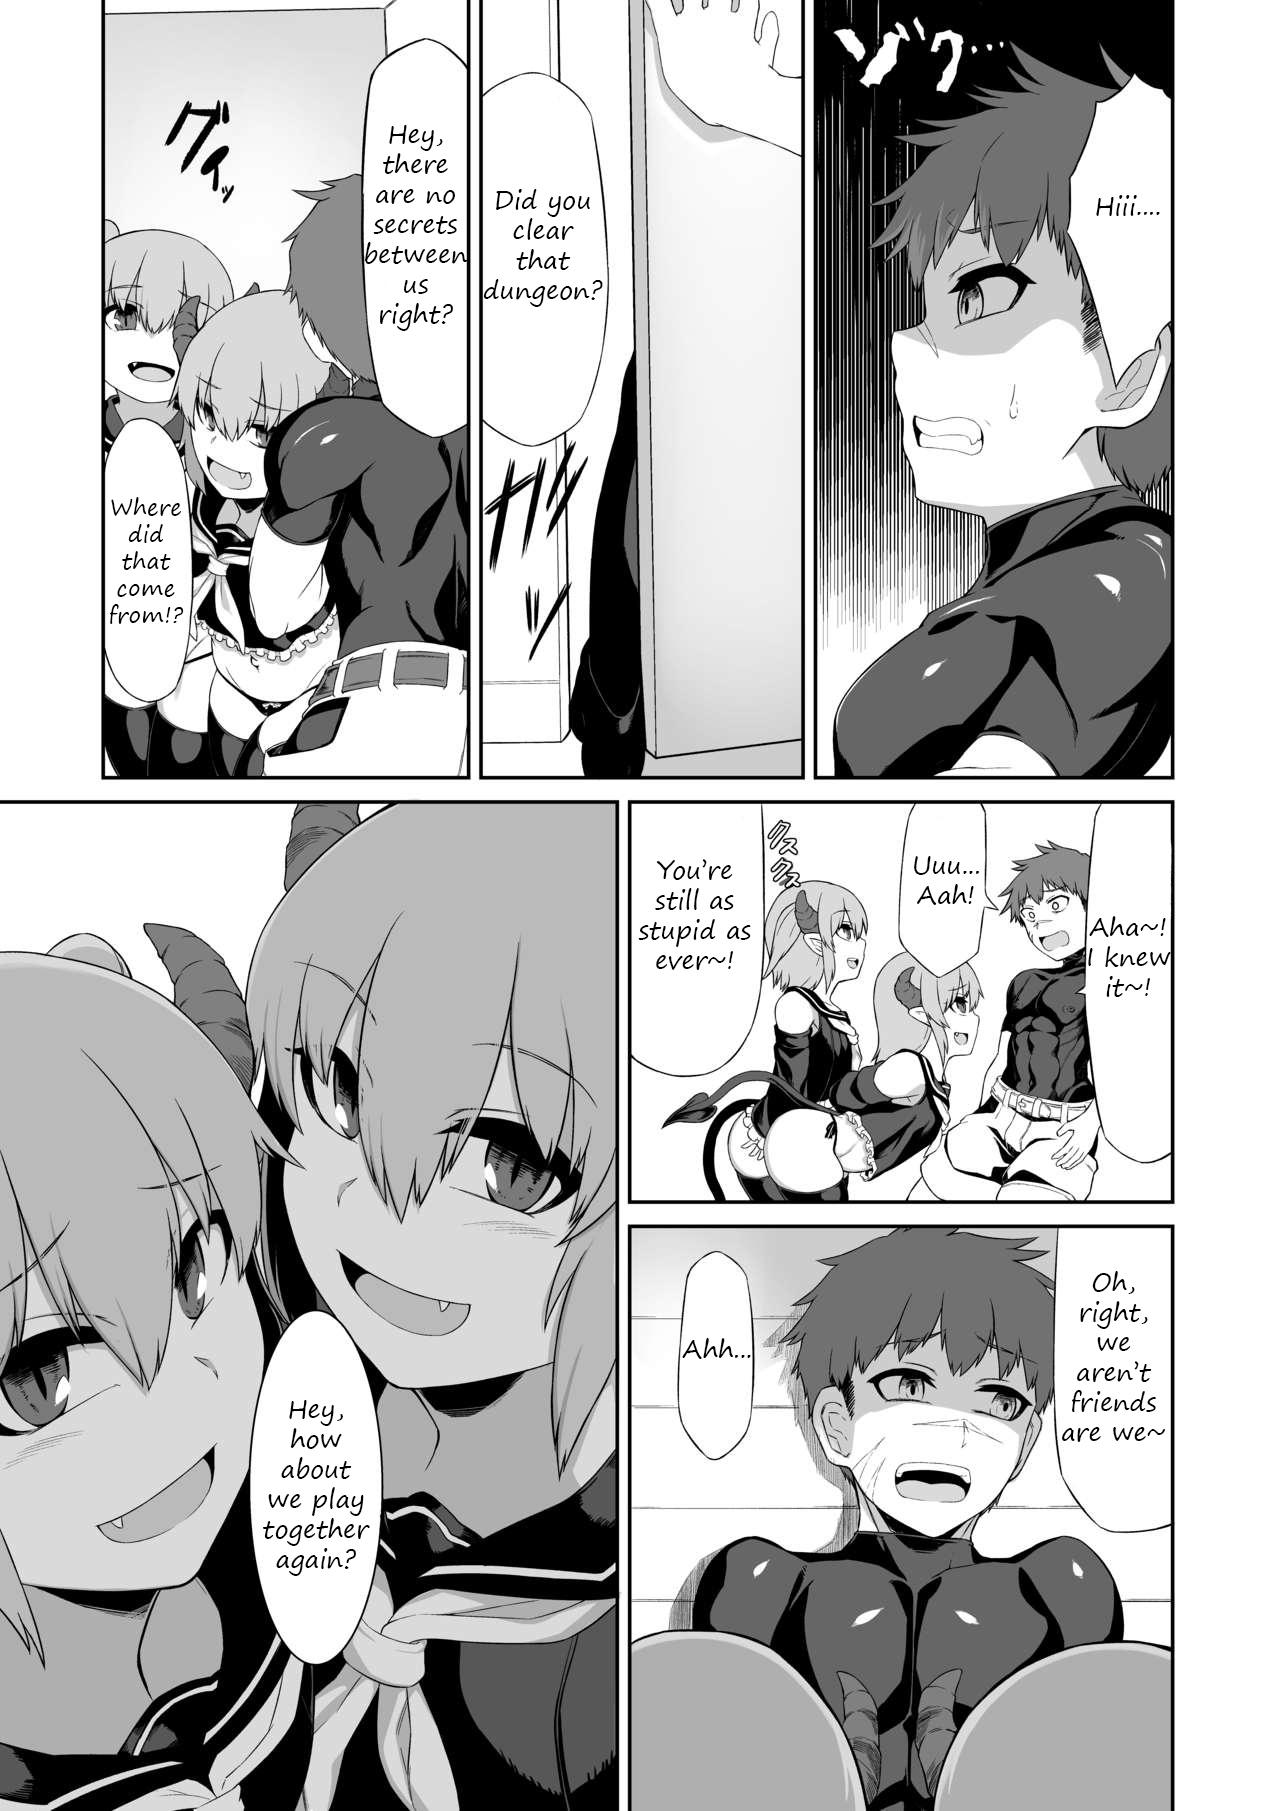 Shecock Futago Succubus to Mahou no Onaho | The Succubus Twins and the Magical Onahole - Original Bwc - Page 6